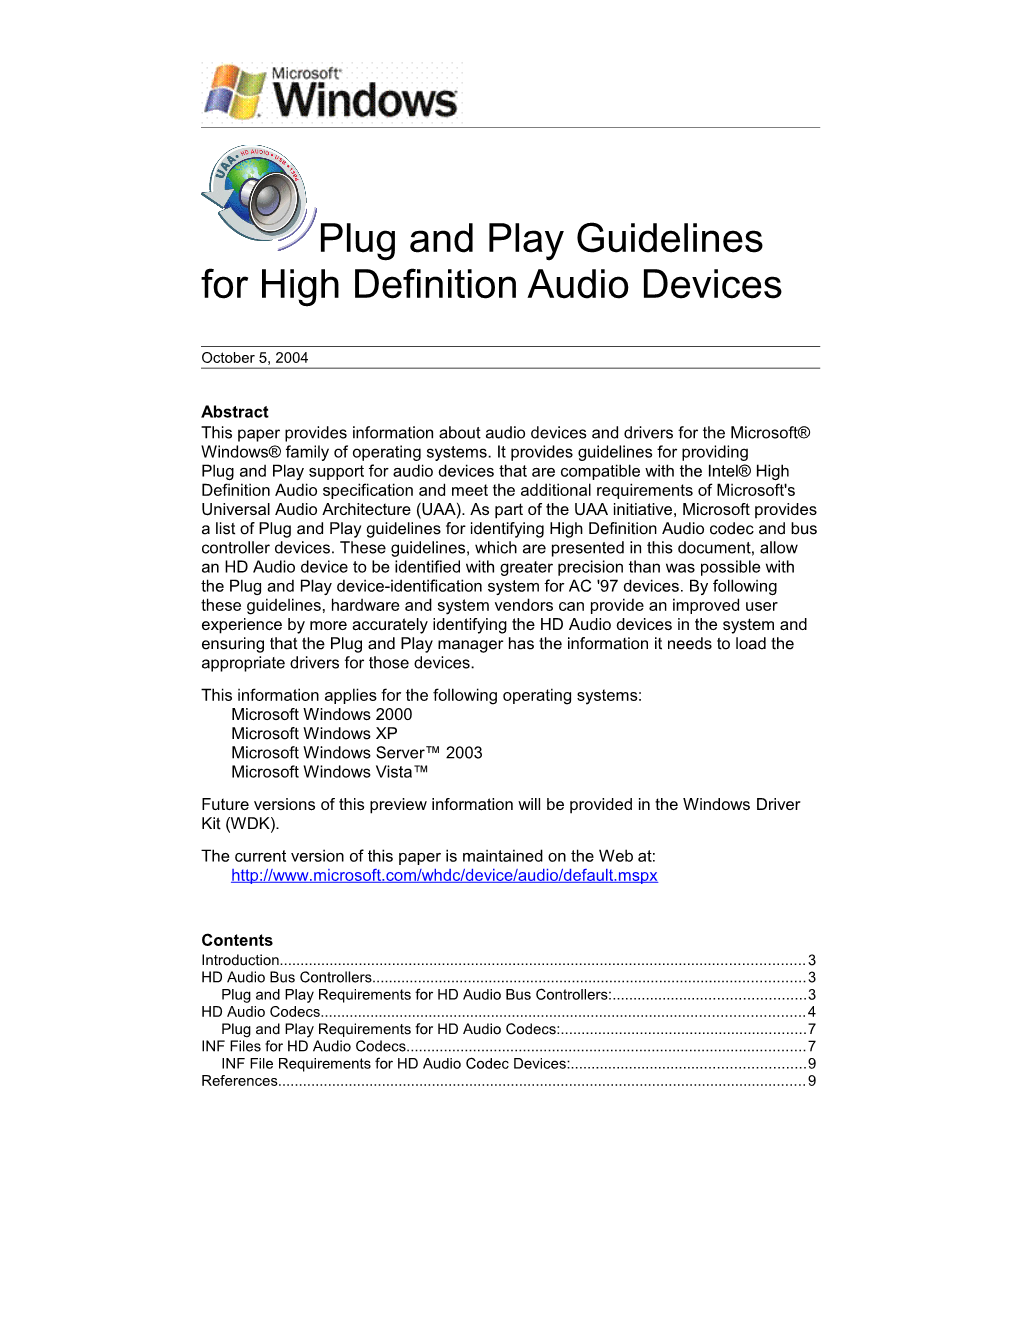 Plug and Play Guidelines for High Definition Audio Devices